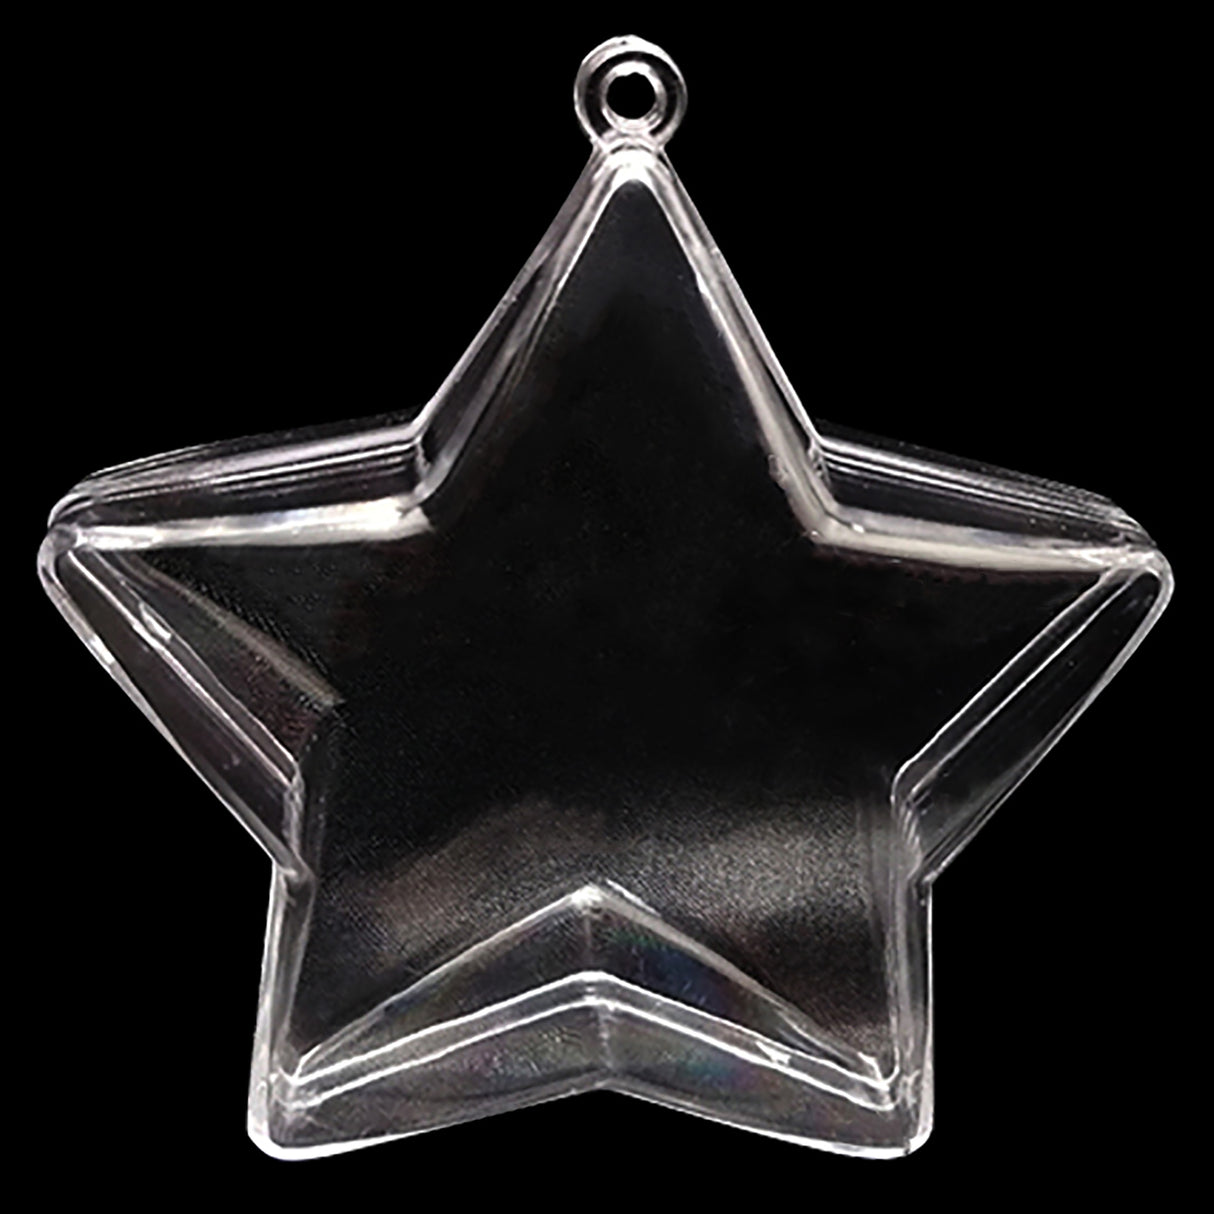 Shop Set of 3 Clear Plastic Star Ornaments 3.25 Inches (83 mm). Buy Christmas Ornaments Clear Plastic Clear Star Plastic for Sale by Online Gift Shop BestPysanky tree decorations personalized xmas animals decorative home online best festive gifts beautiful unique luxury collectible Europe ball figurines ideas mouth blown hand painted made vintage style old fashioned mercury German